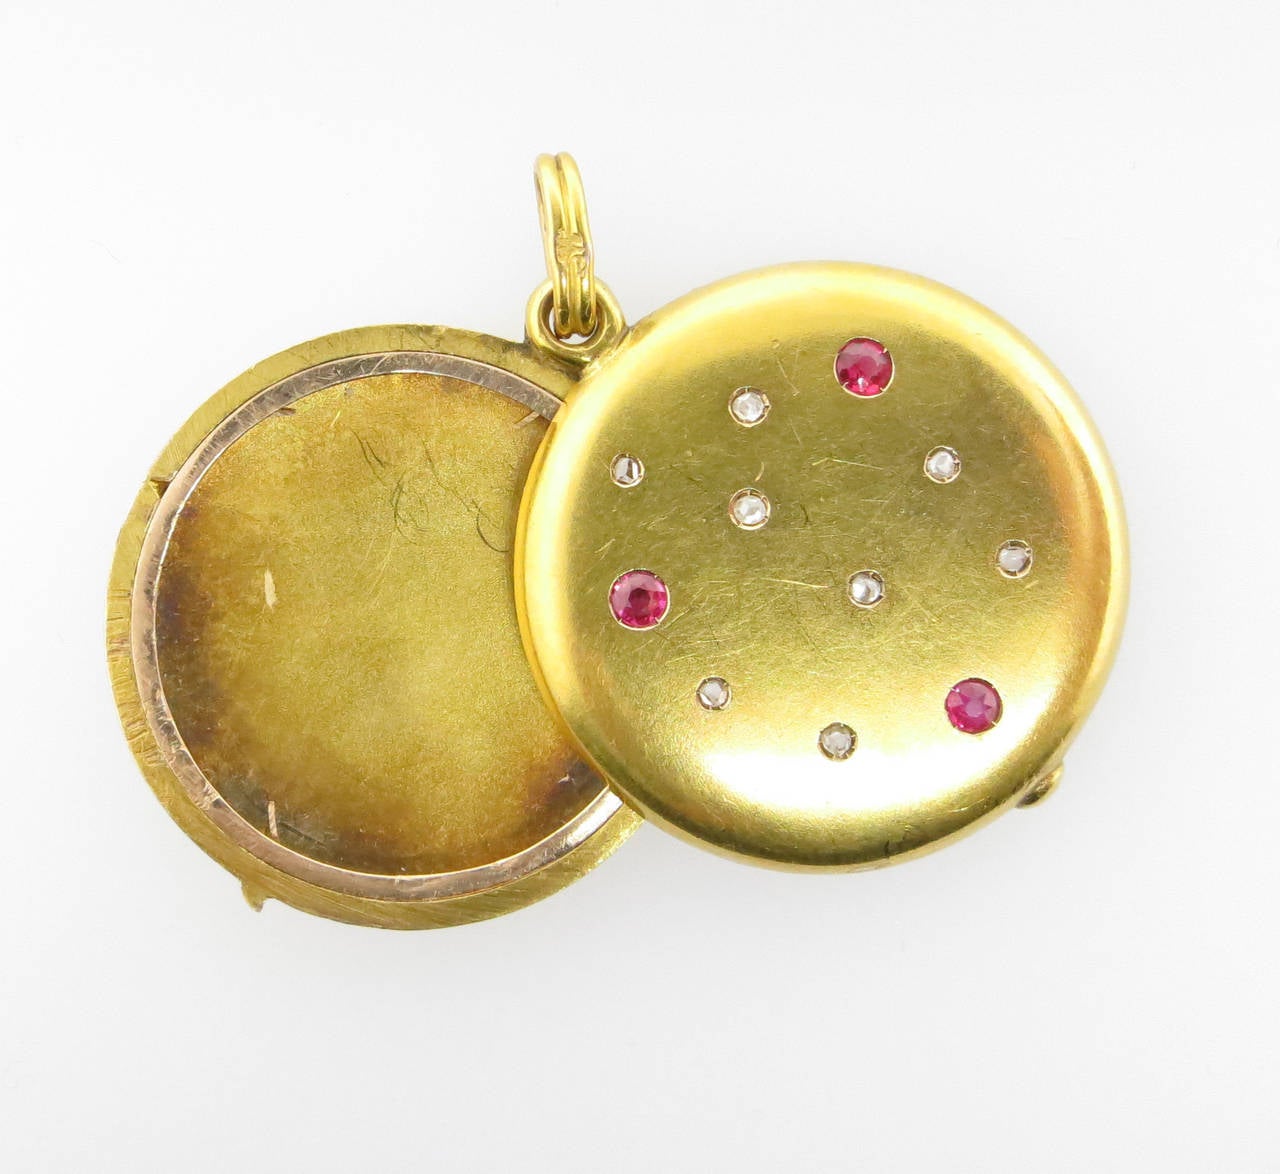 Art Nouveau 14kt. bloomed yellow gold slide locket circa 1900. The front of the locket is set with eight rose cut diamonds and three faceted natural rubies. Minor surface abrasion.